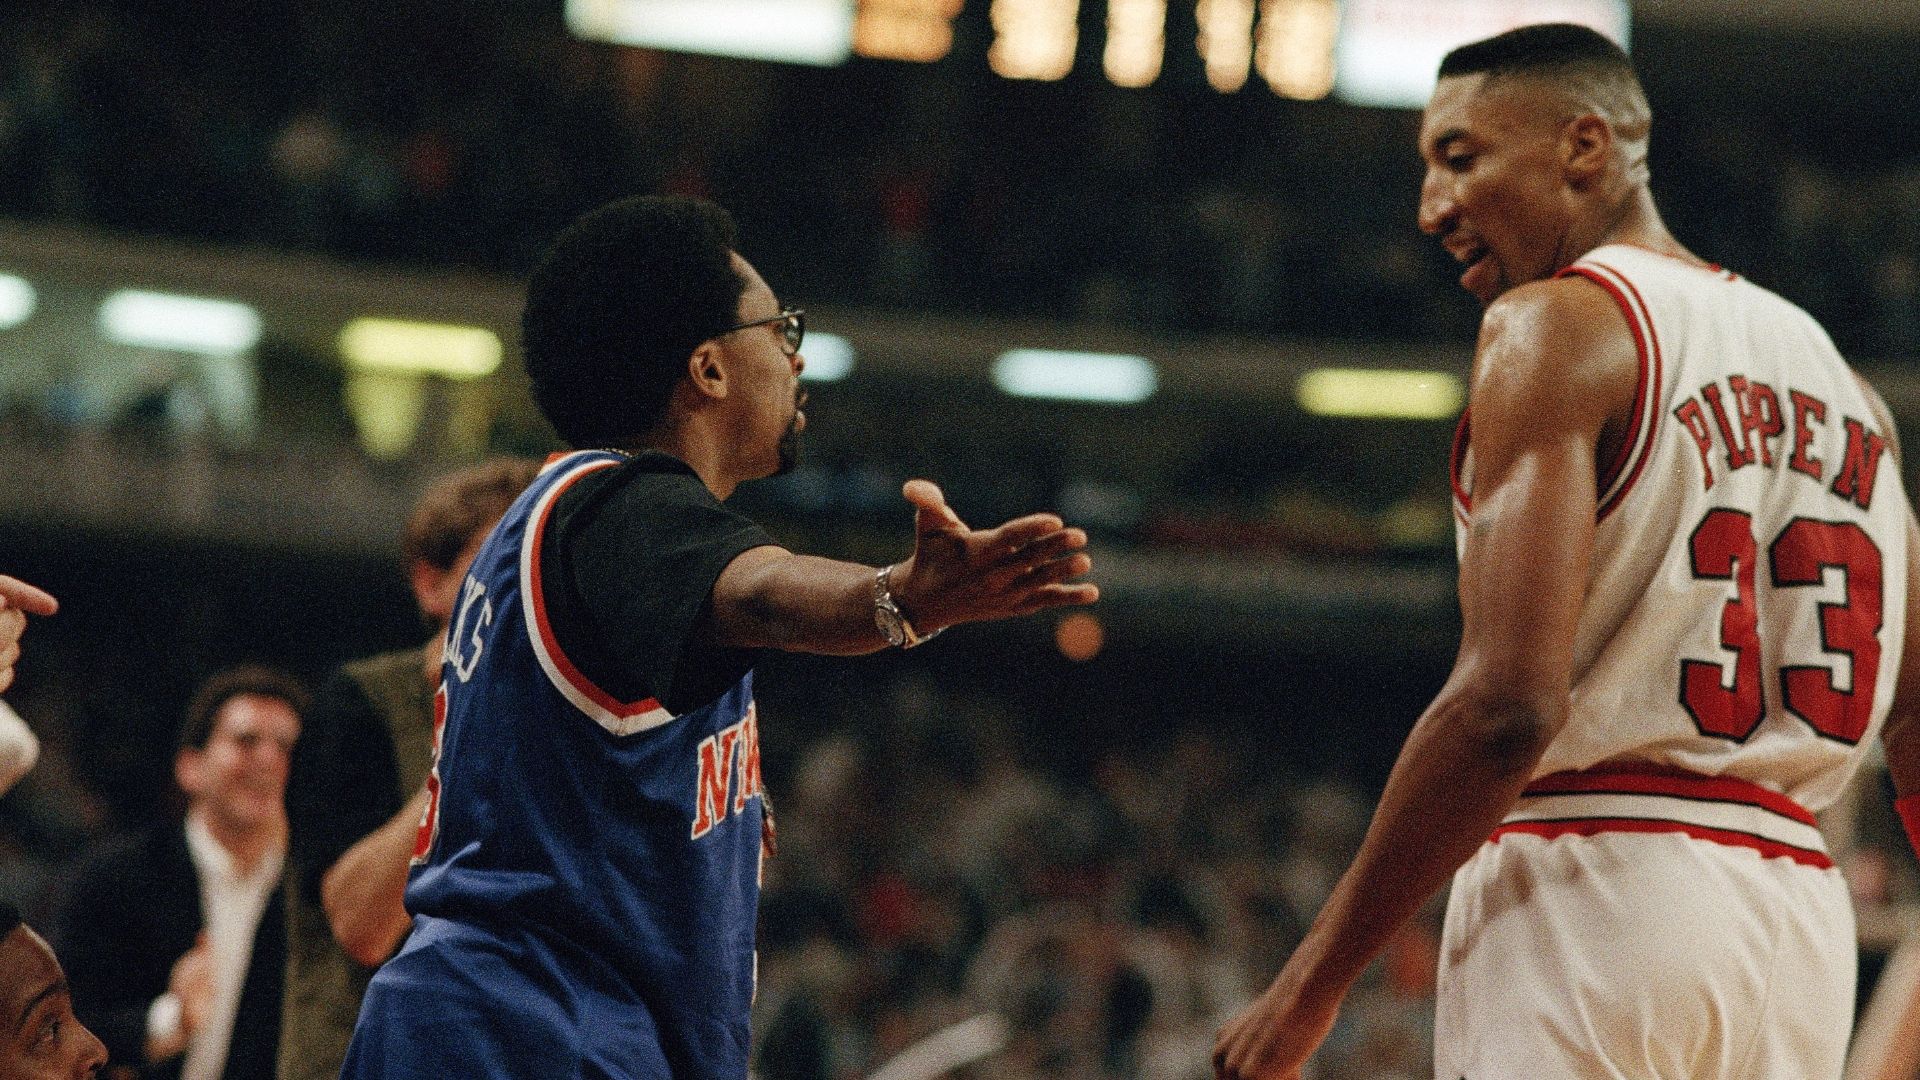 Flashback Pippen dunks on Ewing, then taunts Spike Lee